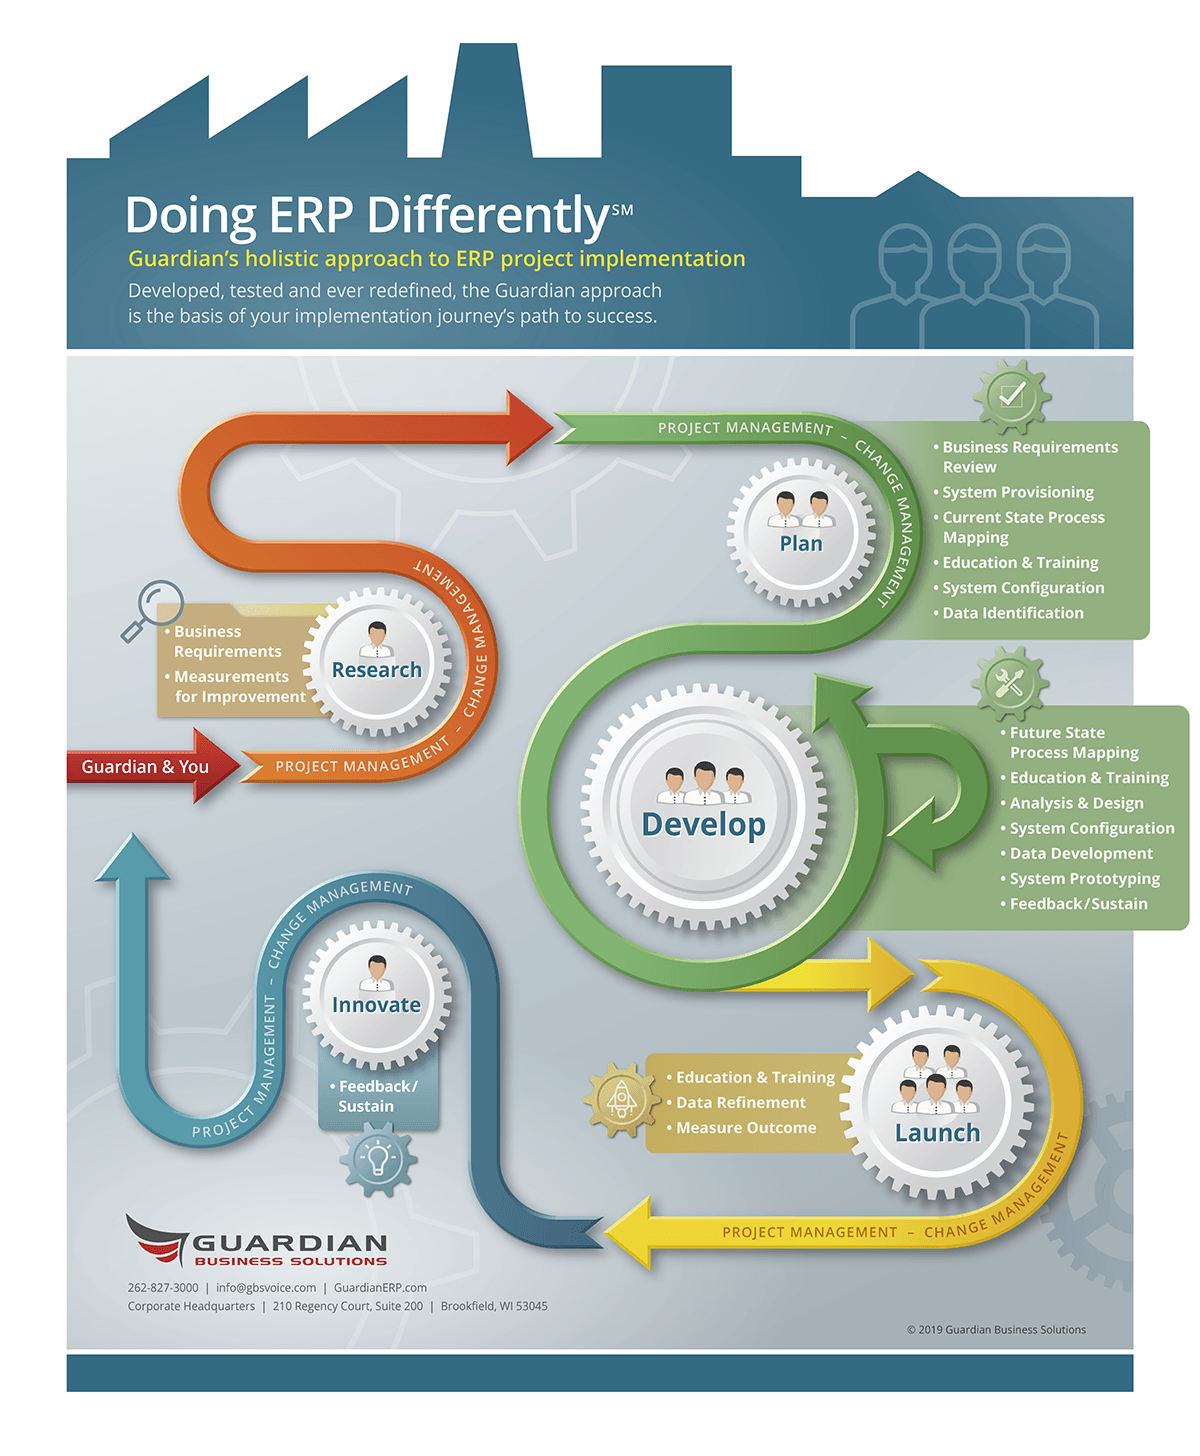 Doing ERP Differently